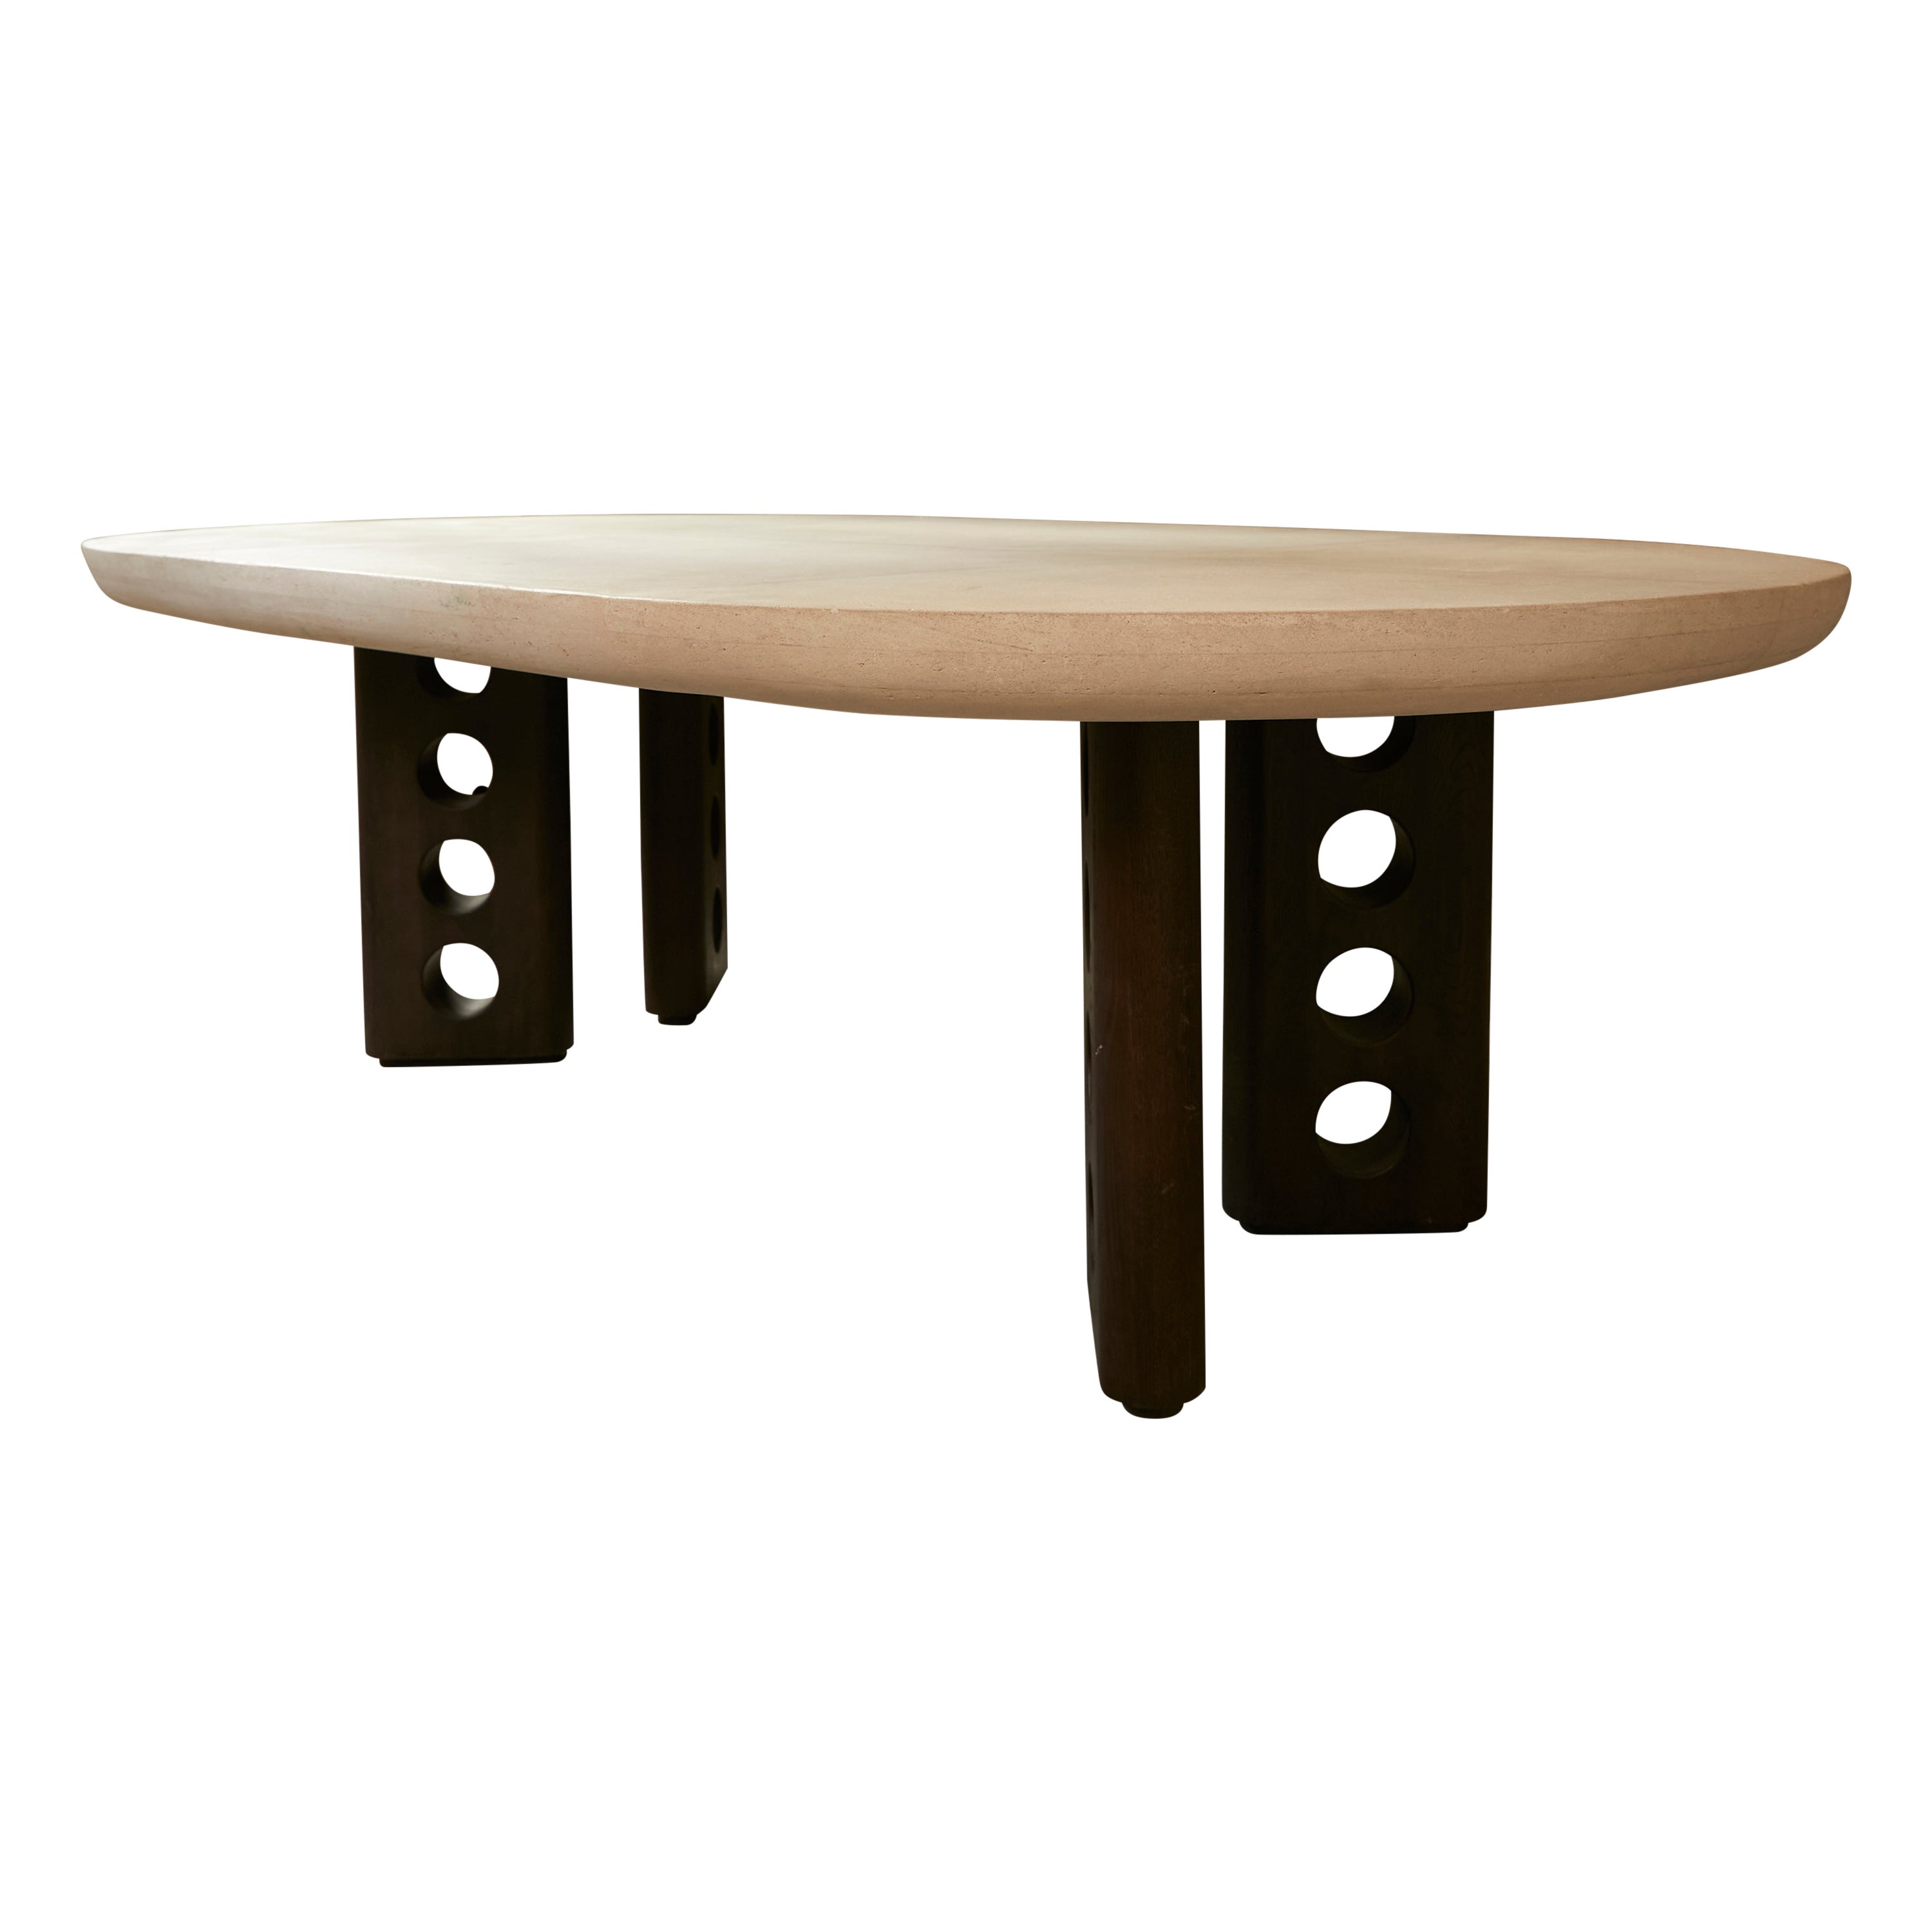 Sepúlveda dining table with natural stone and wooden culpted walnut legs For Sale